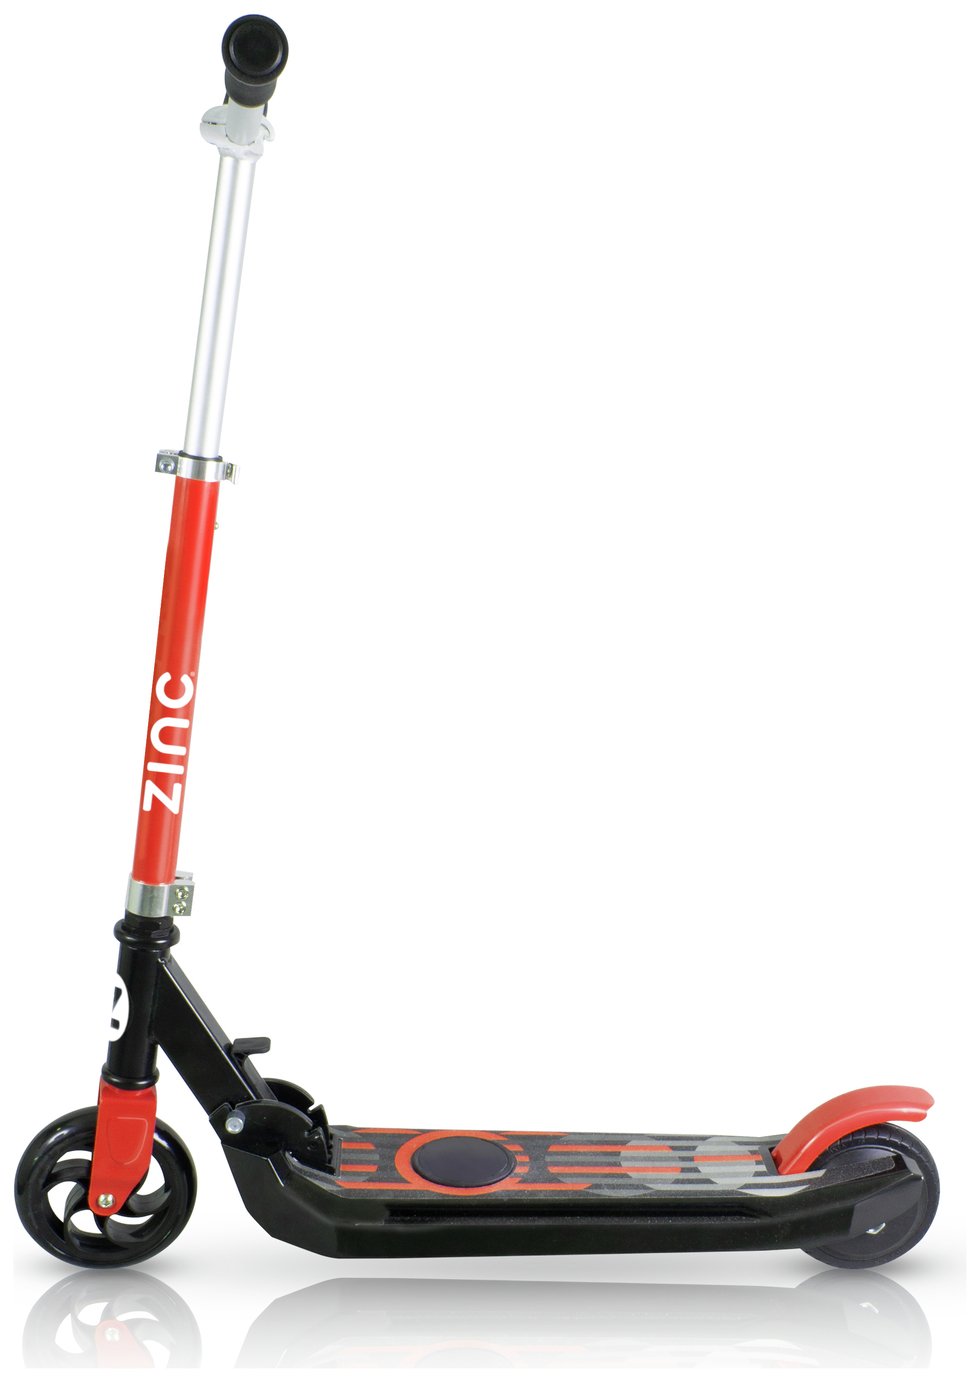 Zinc E4 Max Lithium Electric Scooter Review